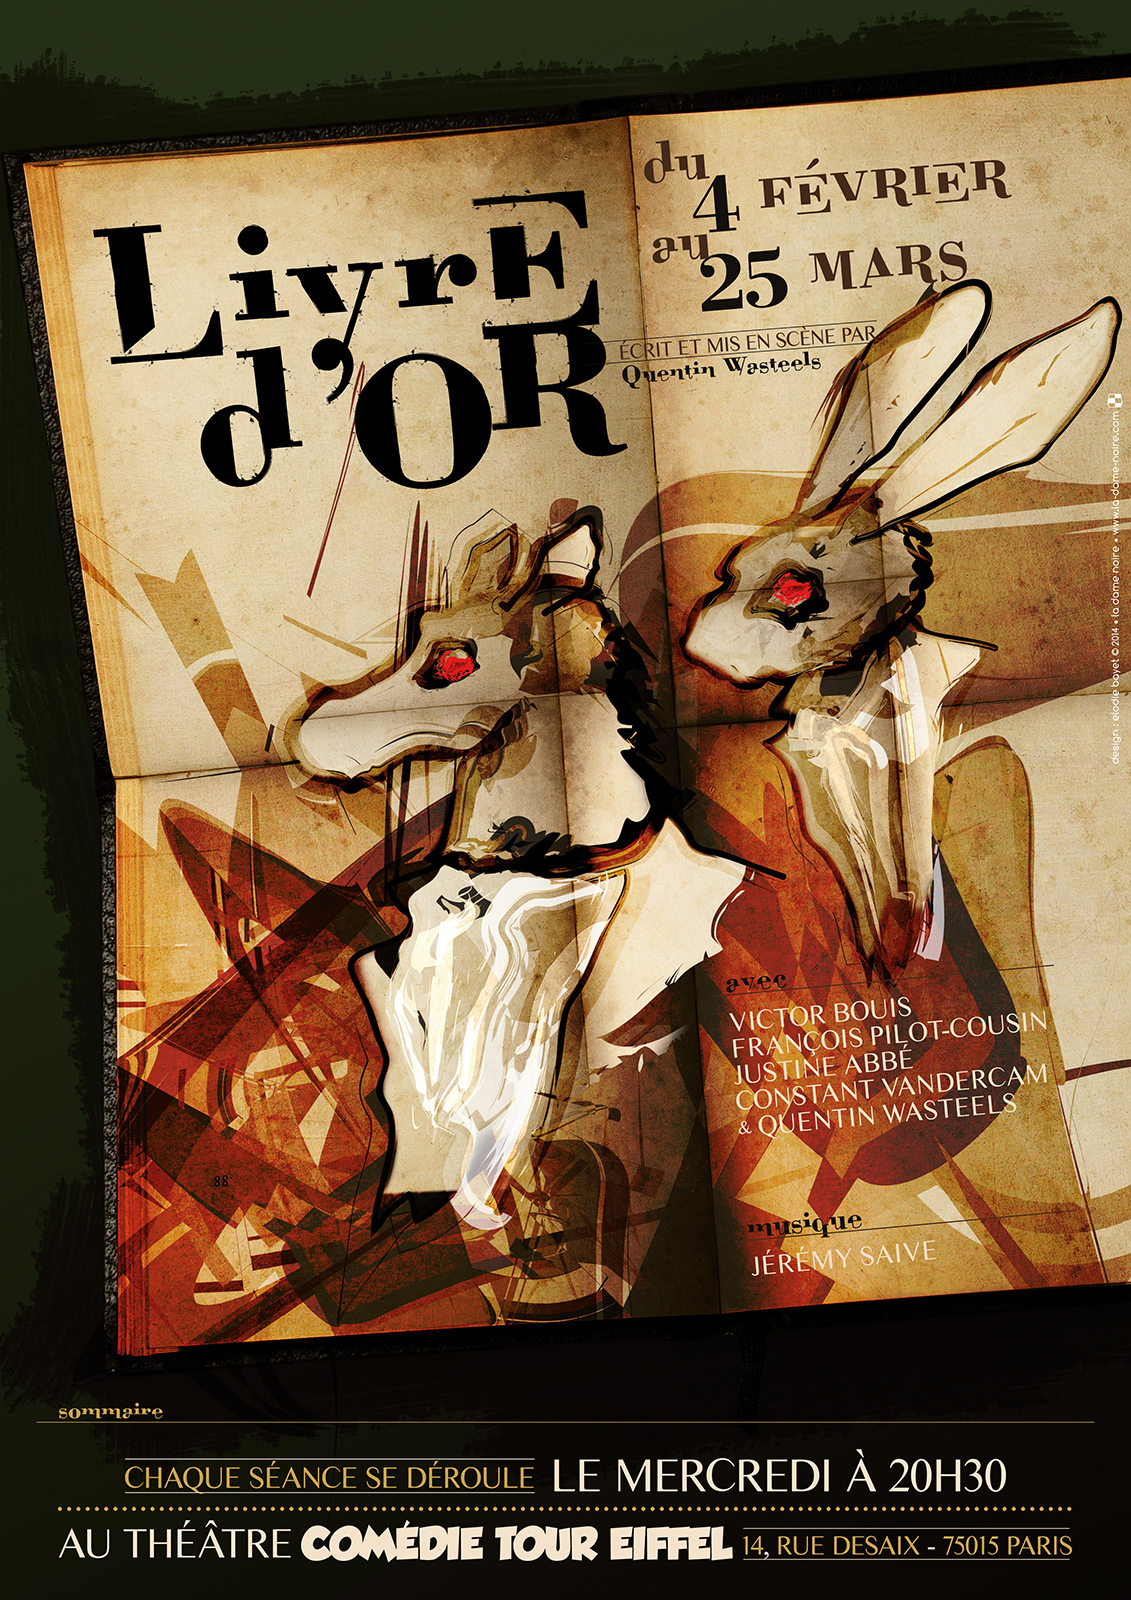 Poster ft A3 for Livre d'Or exhibition at theater